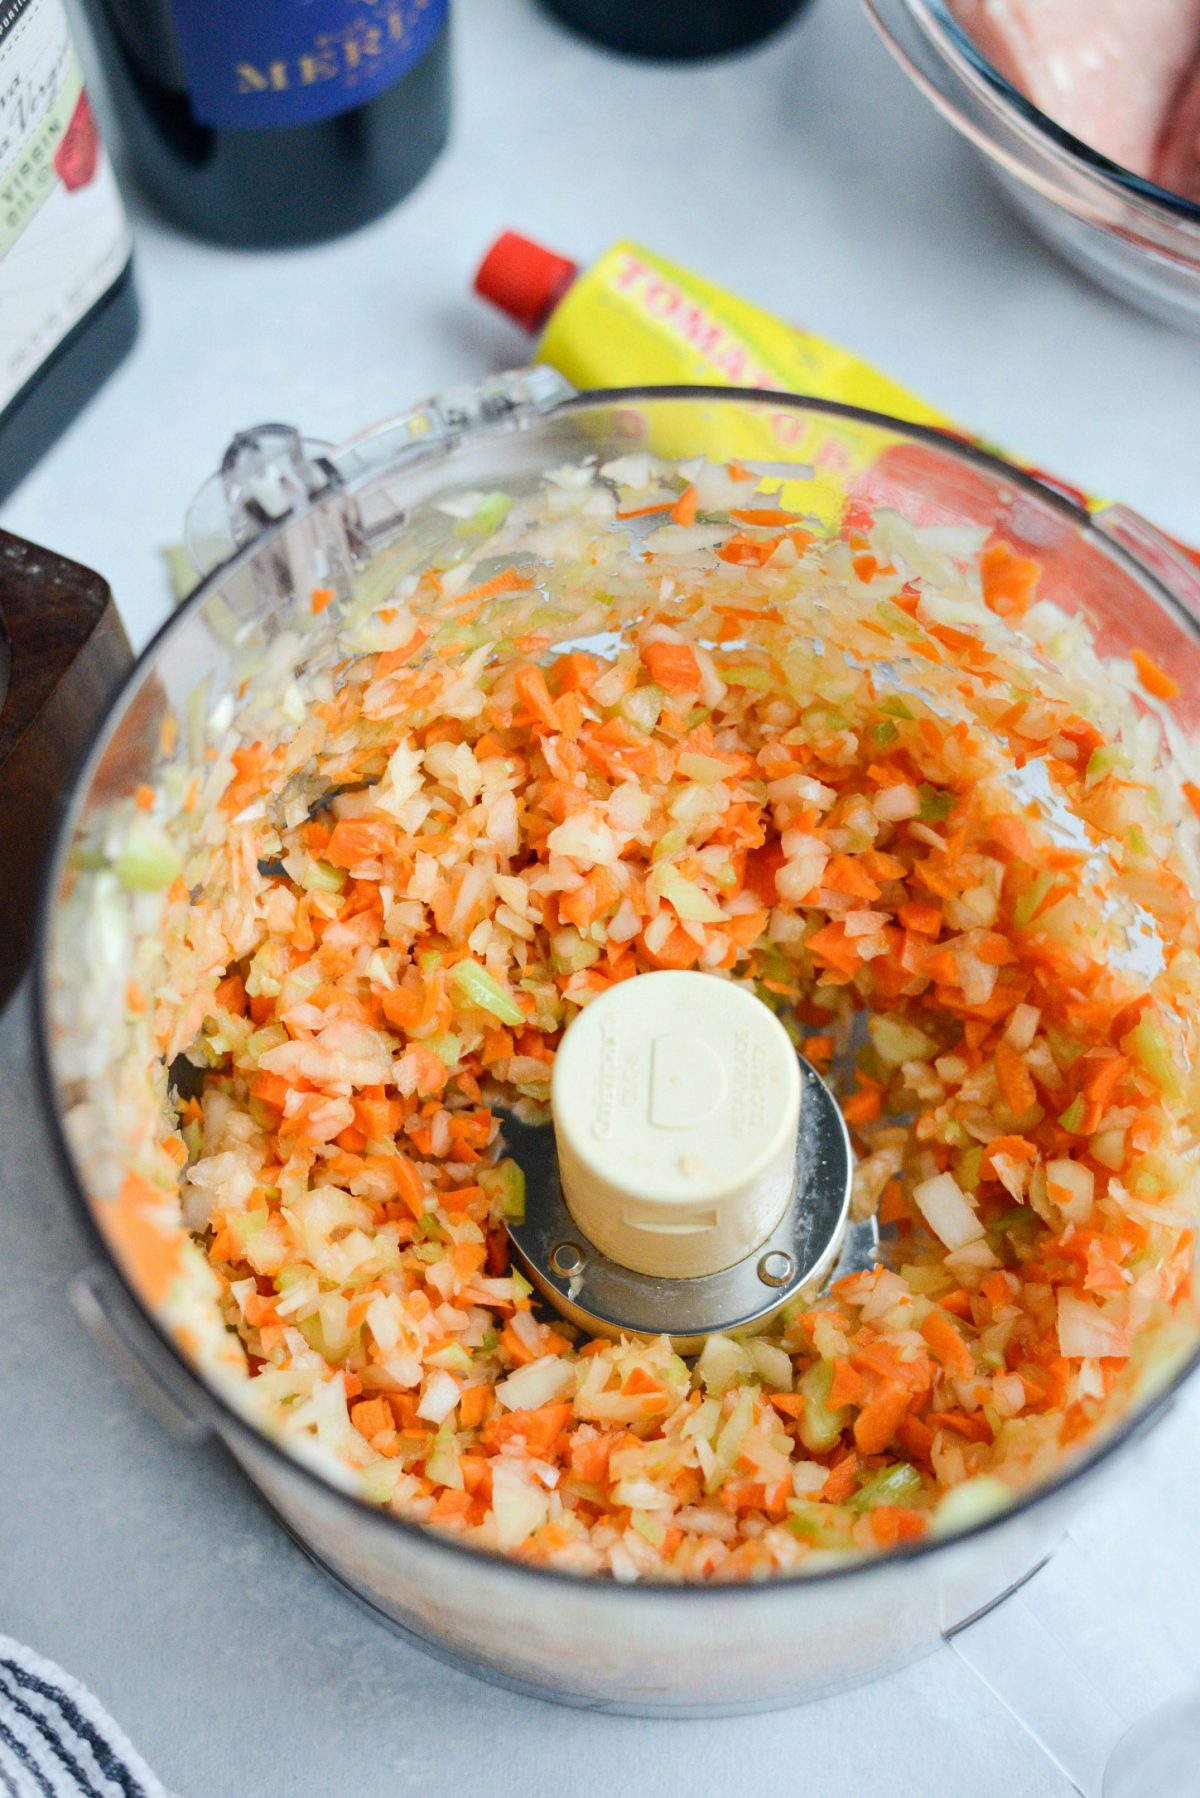 finely chop carrots, celery and onions in a food processor.